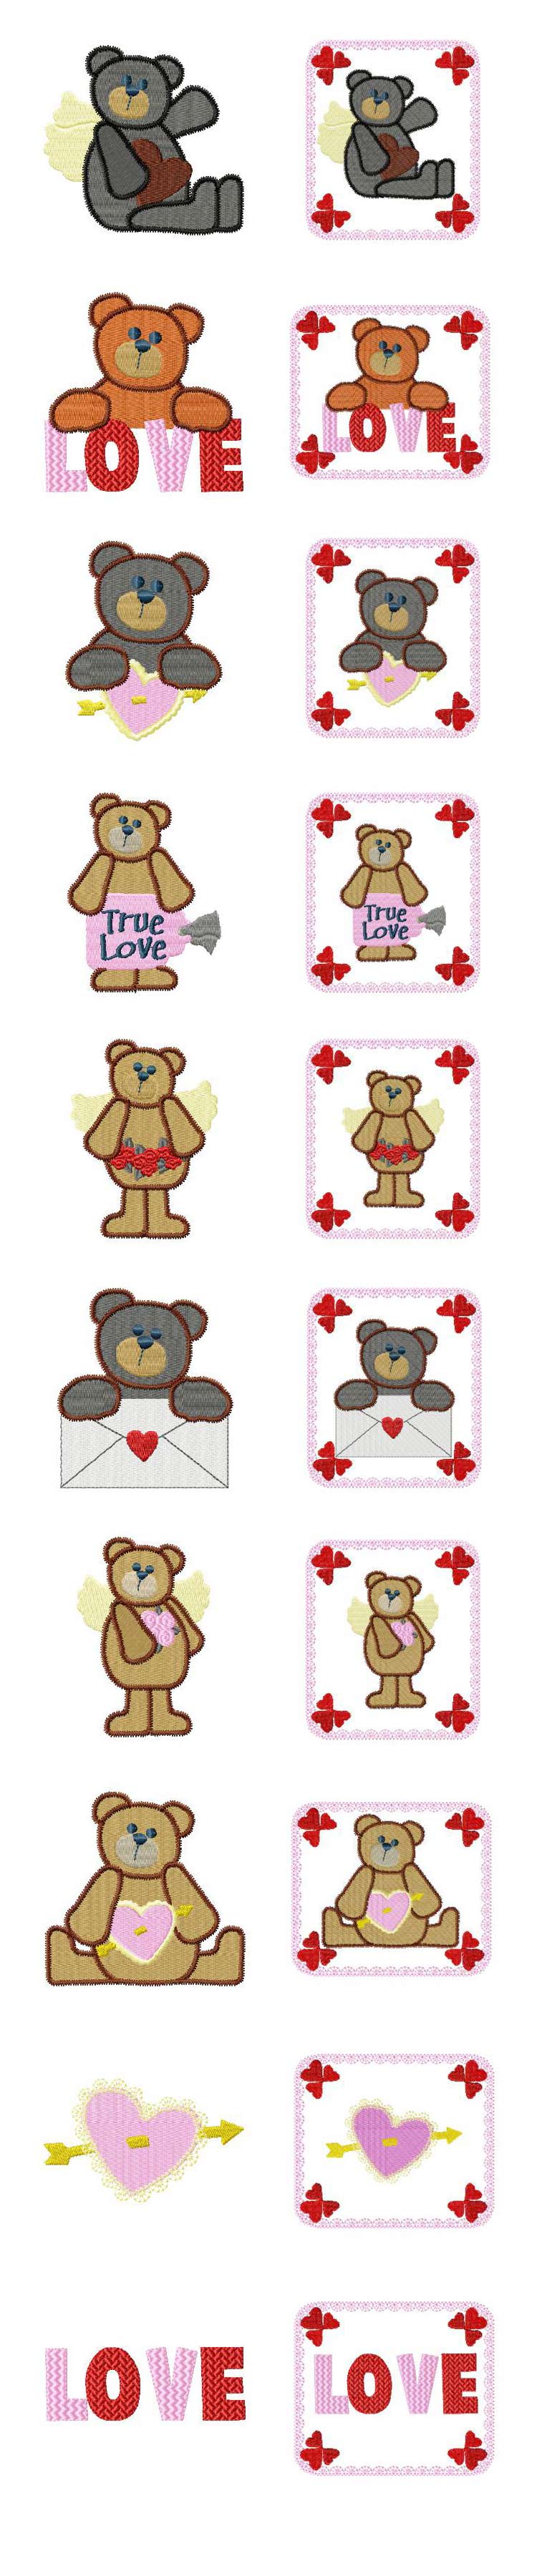 Lovable Valentine Bears Embroidery Machine Design Details